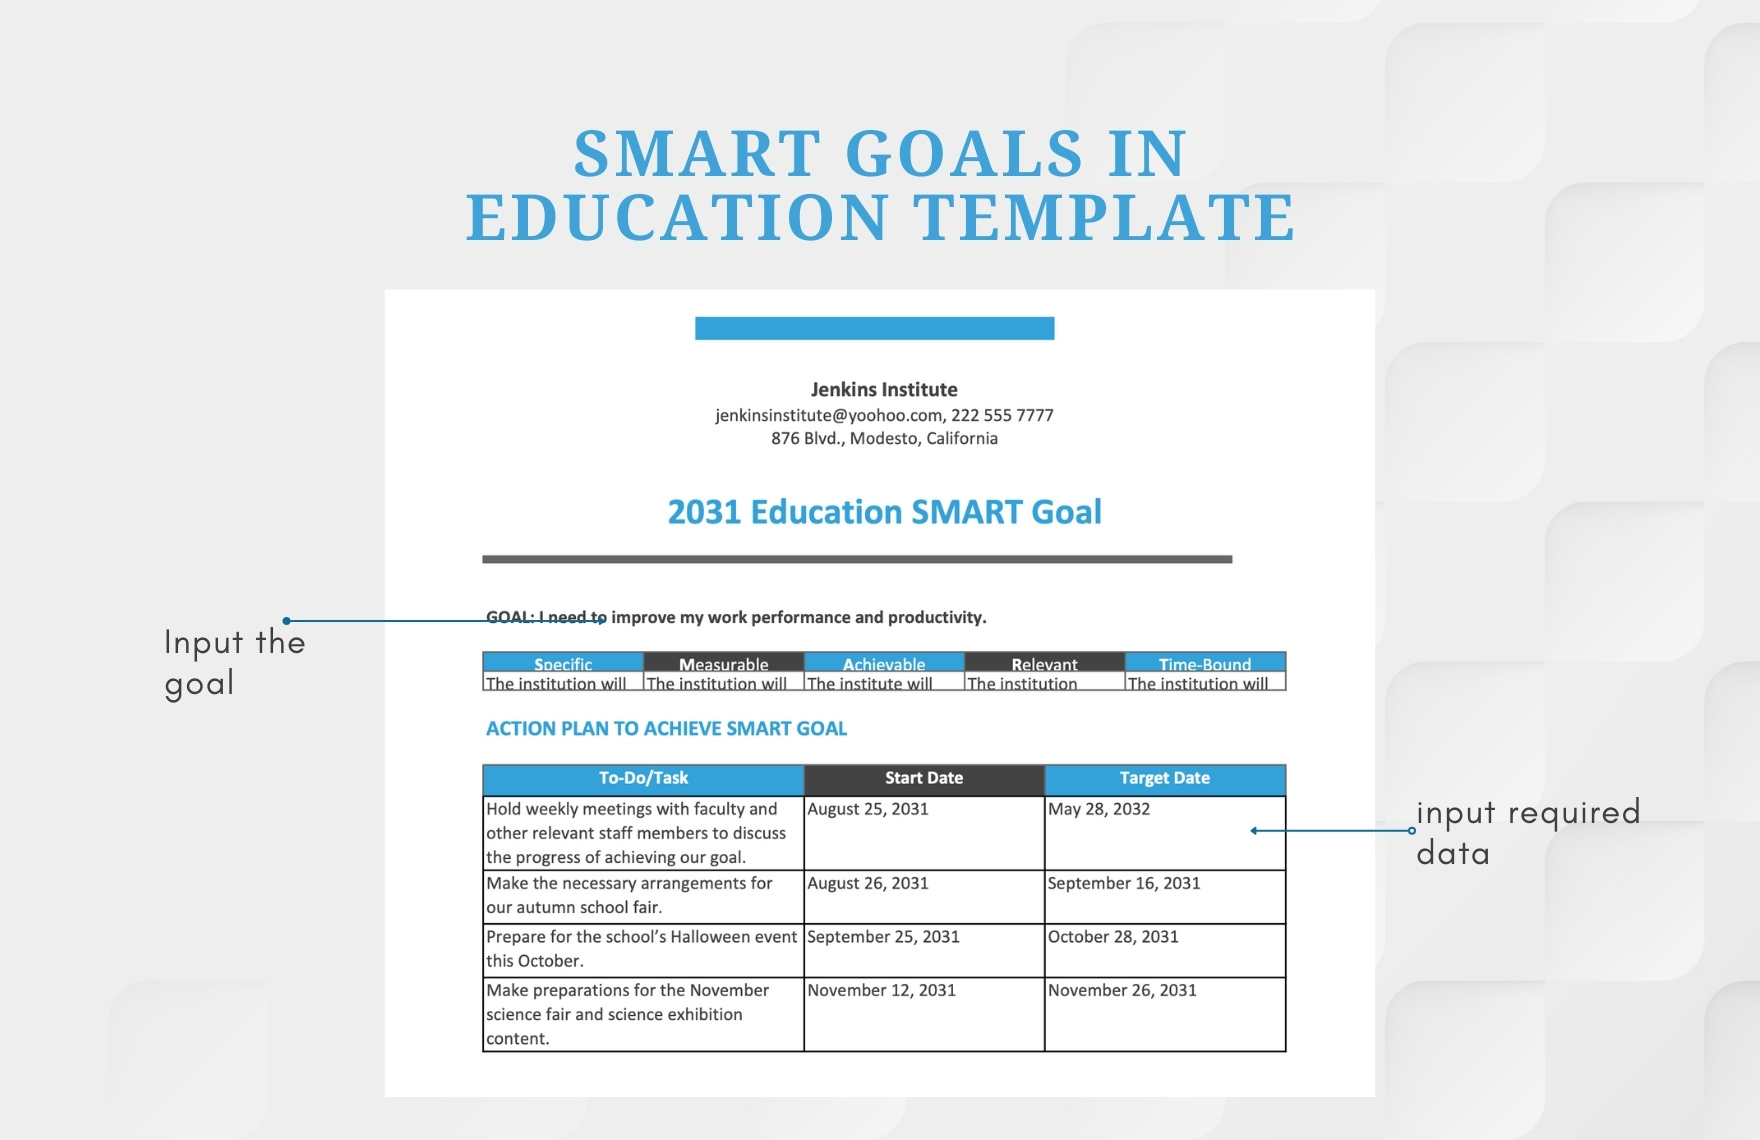 Smart Goals in Education Template